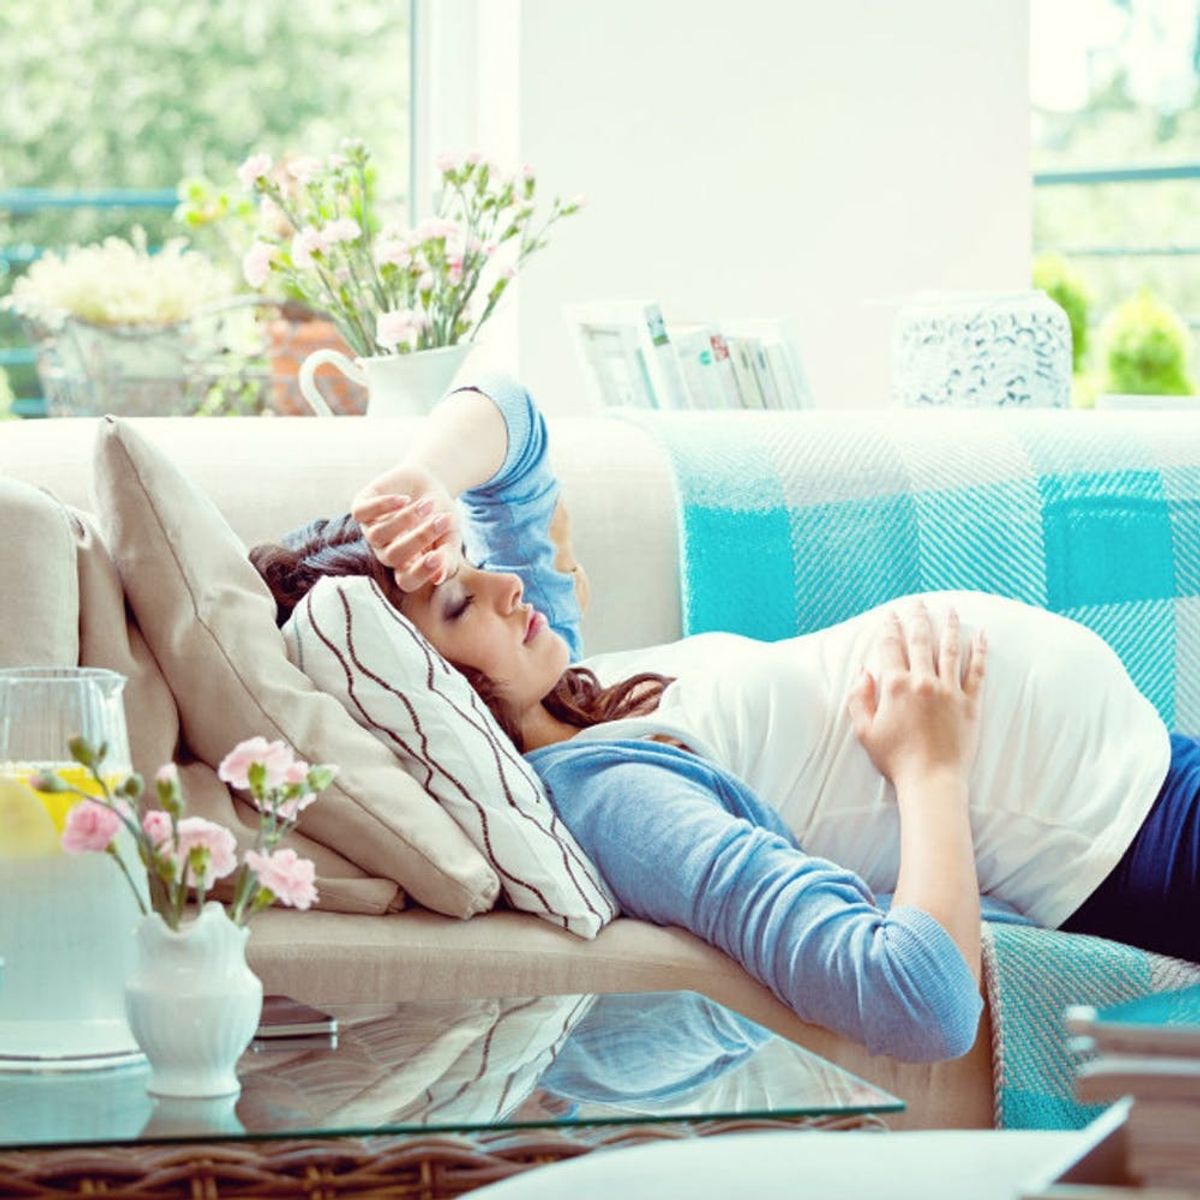 How to Respond When Someone Calls You Lazy When You’re Pregnant